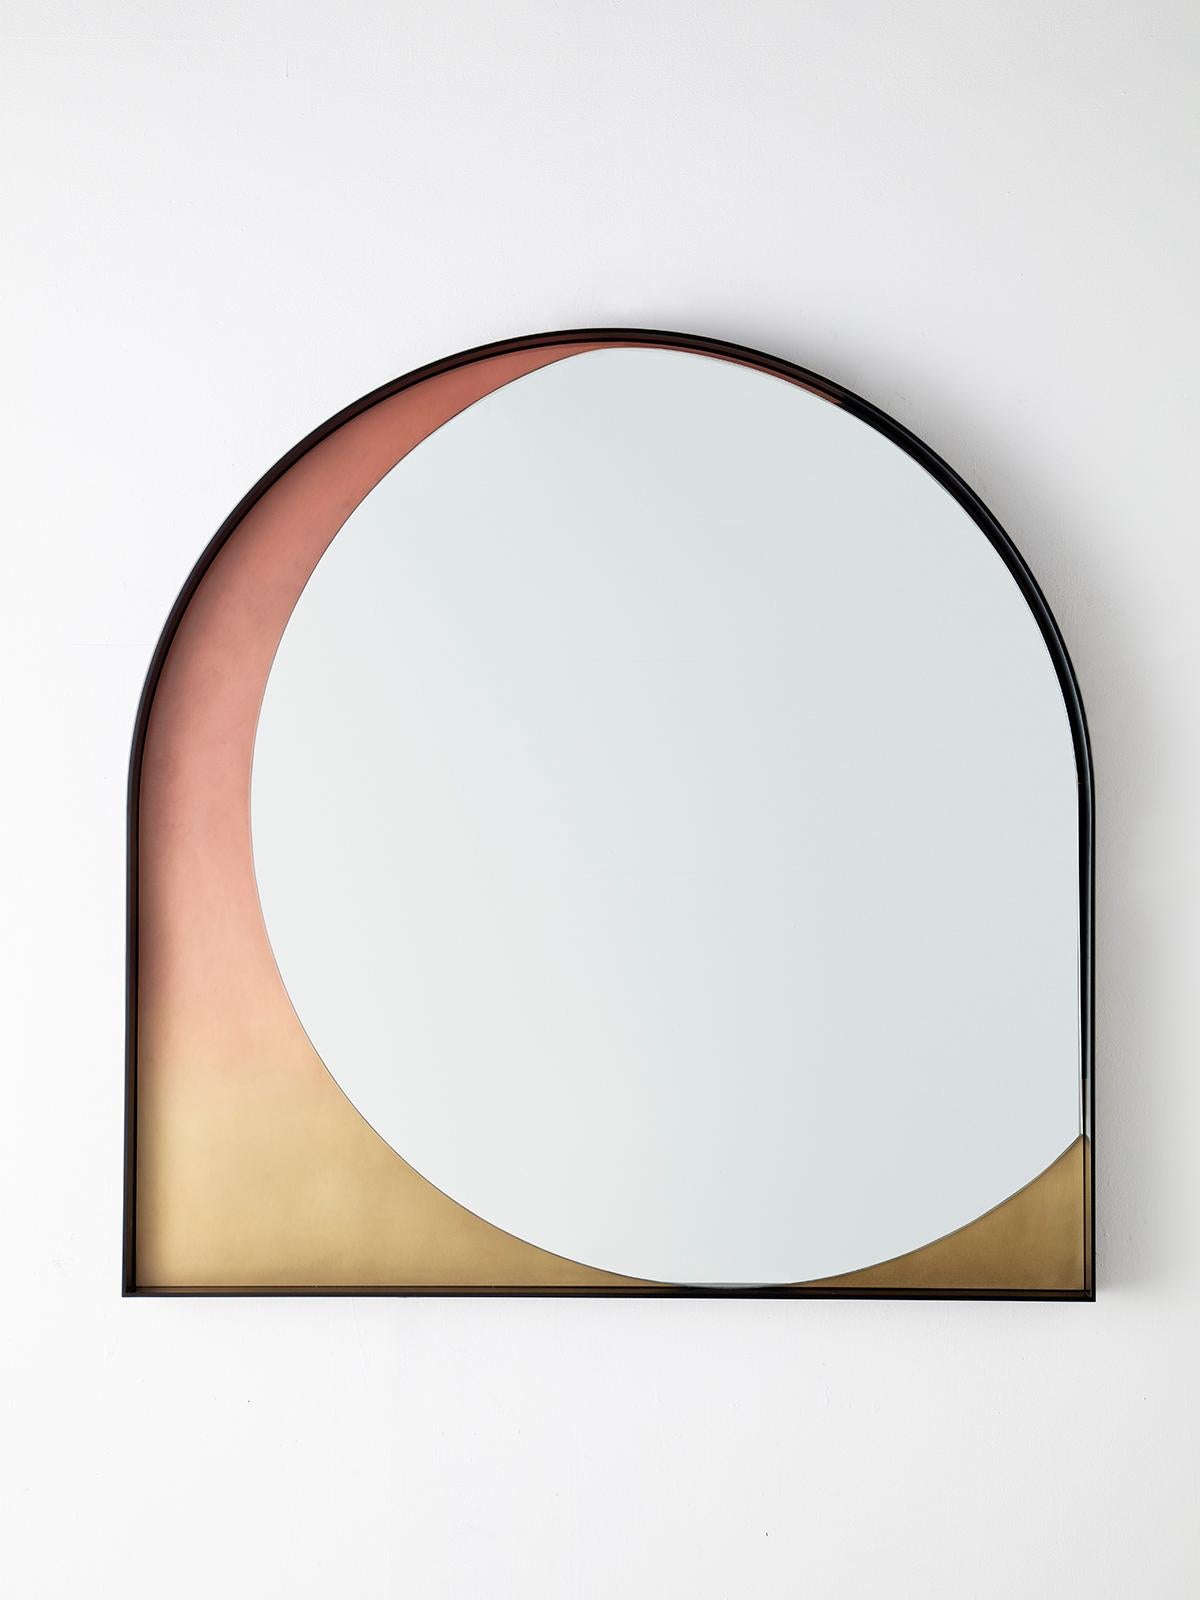 Simplicity is key to the slip mirror, whose thin blackened stainless steel frame delicately holds the suggestion of a round mirror. A contrasting patinated bronze gradient is revealed, hinting at layers hidden beneath.
 